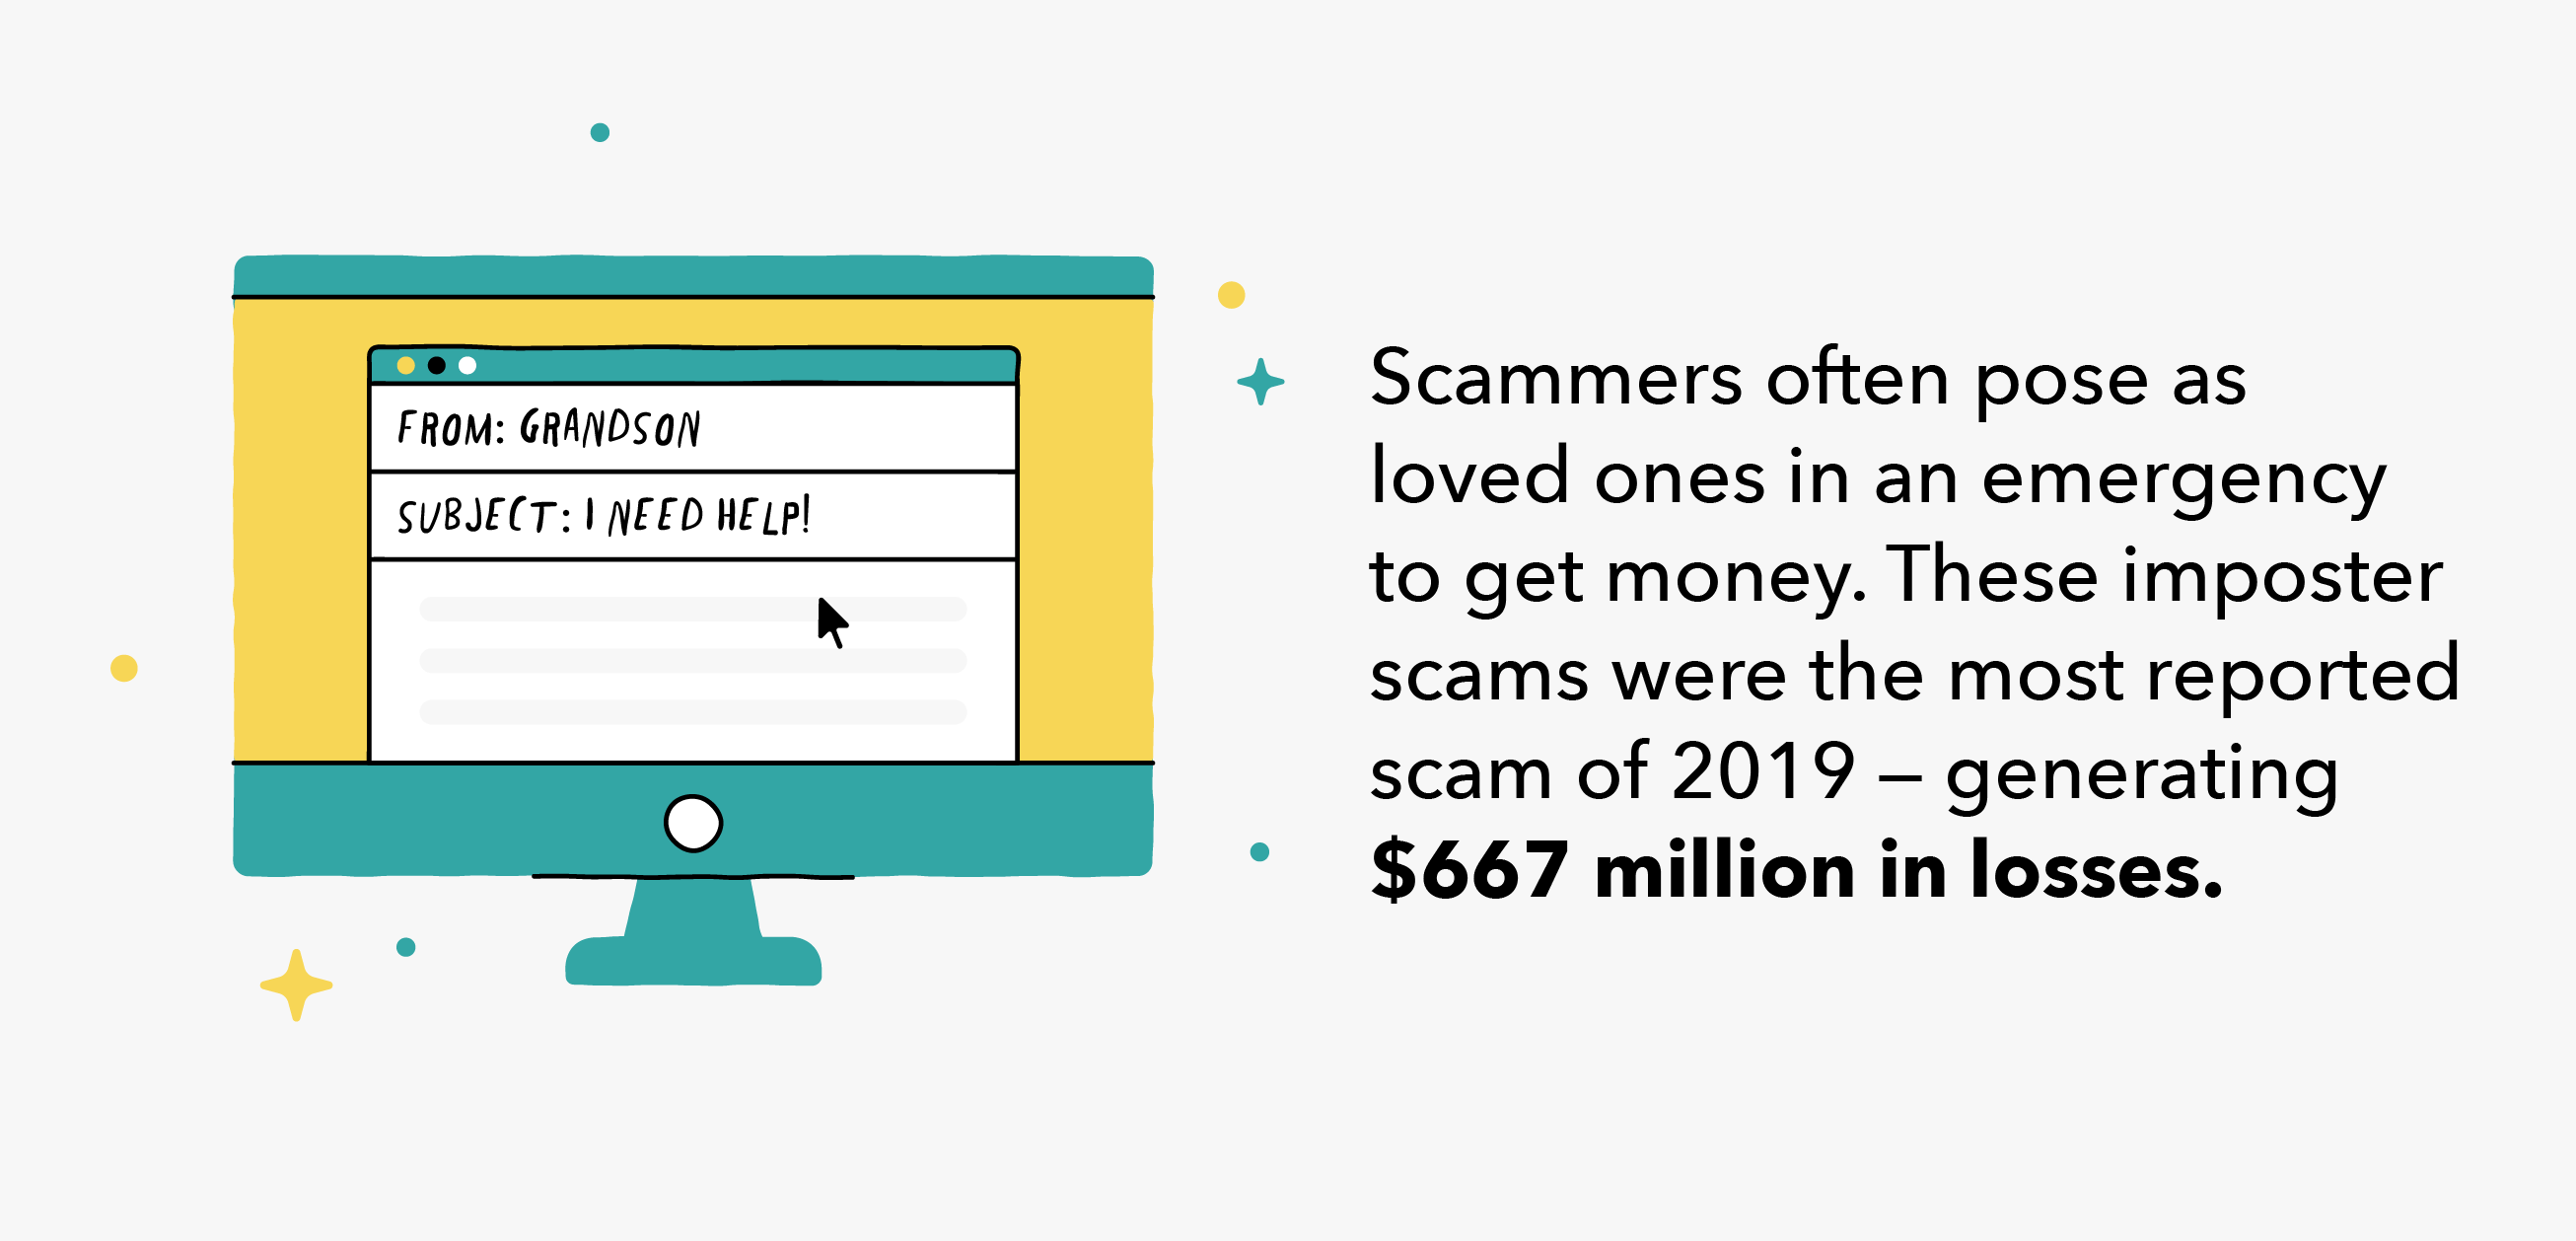 scammers often target loved ones, scamming $667 million from Americans in 2019